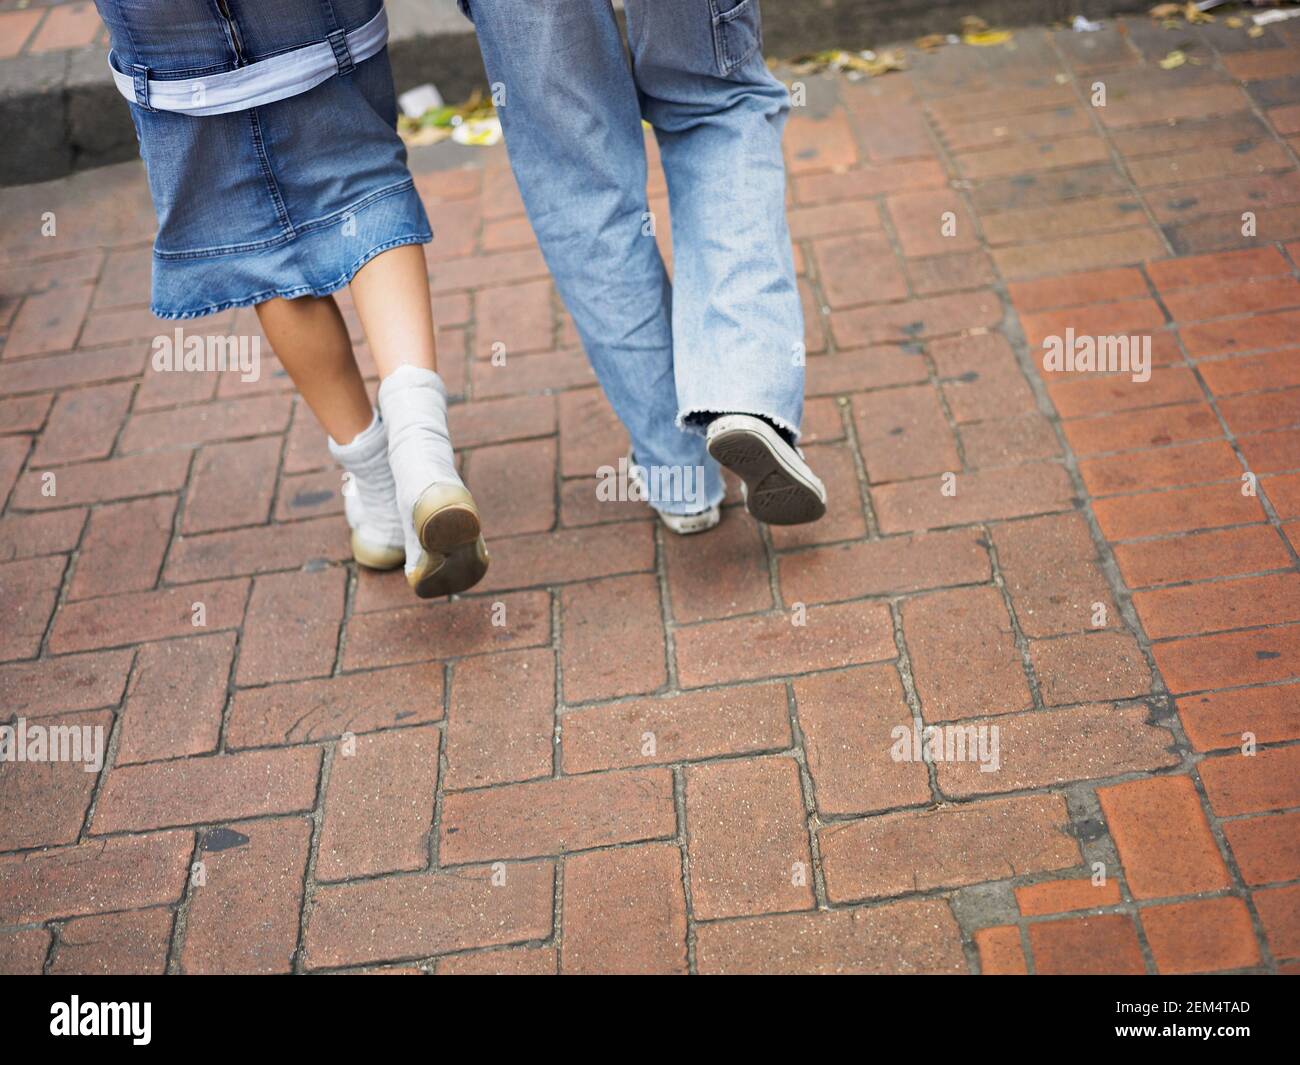 Low section view of a man and a woman walking on the sidewalk Stock Photo